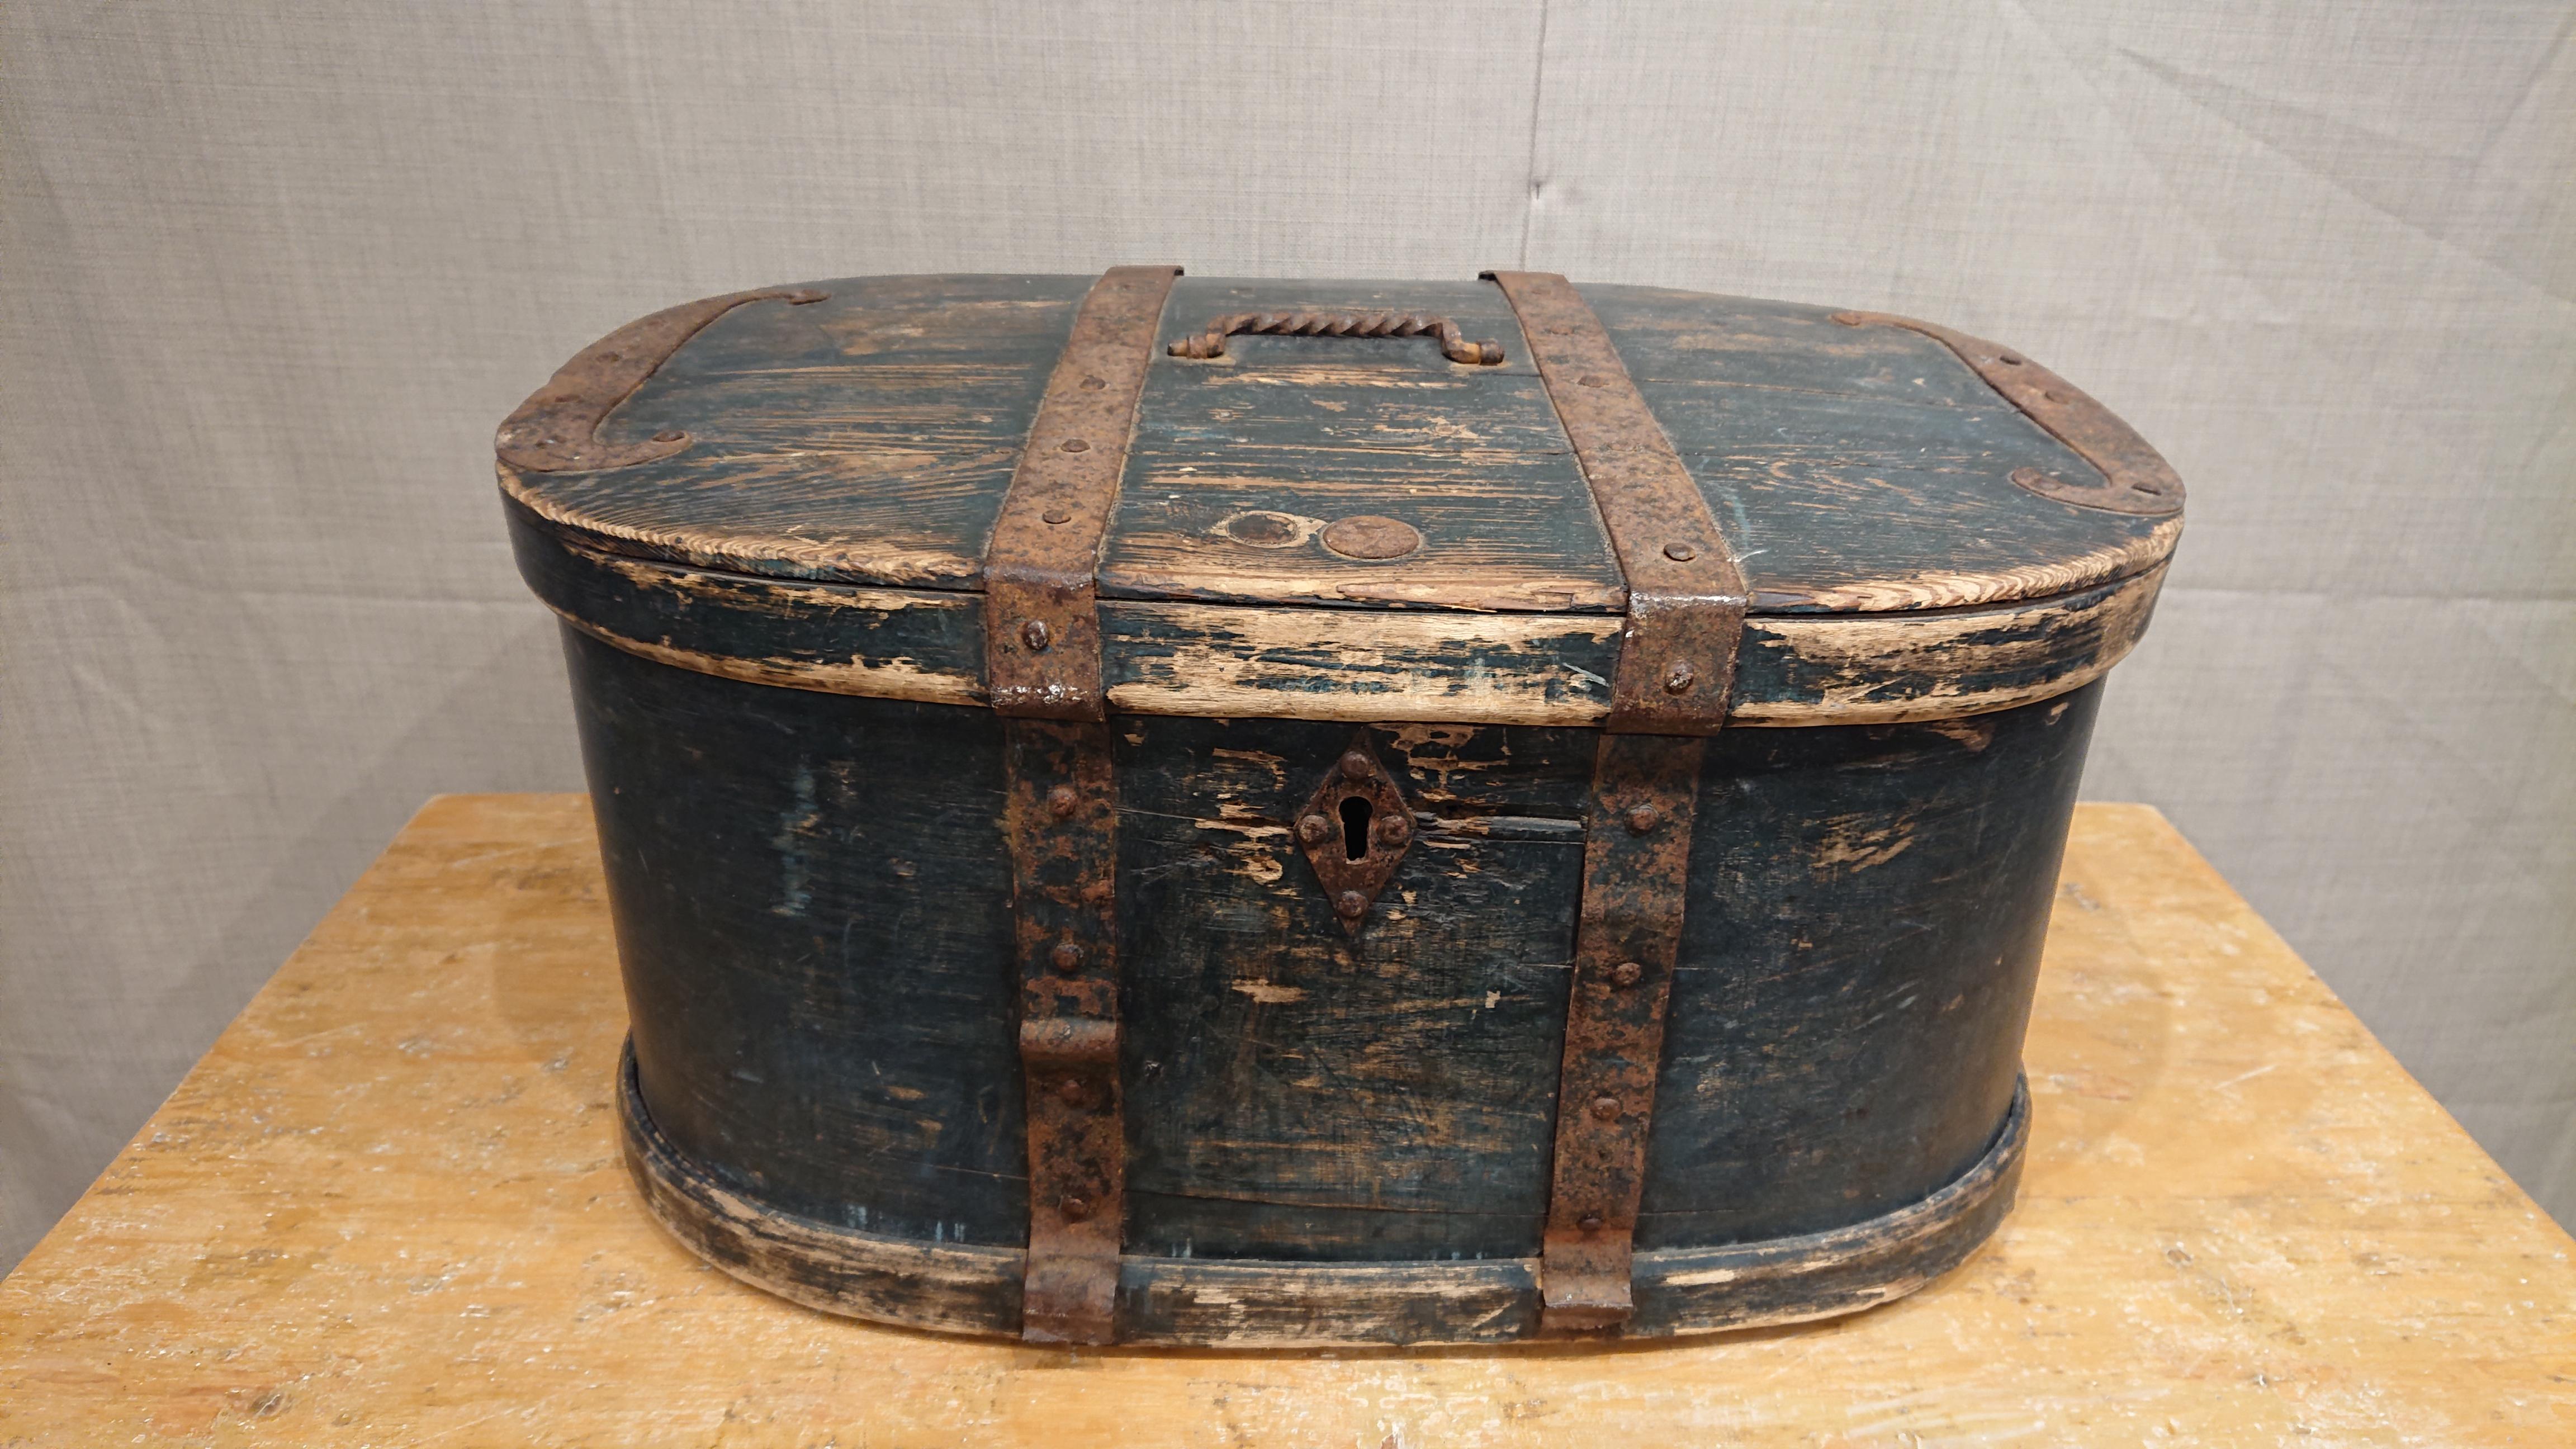 19th century Swedish Folk Art chest box from Boden Norrbotten, Northern Sweden.
A very charming Box / chest with untouched Original paint.
Decorated with handwrought iron around the box and ower the lid.
The box was used to store valuables during